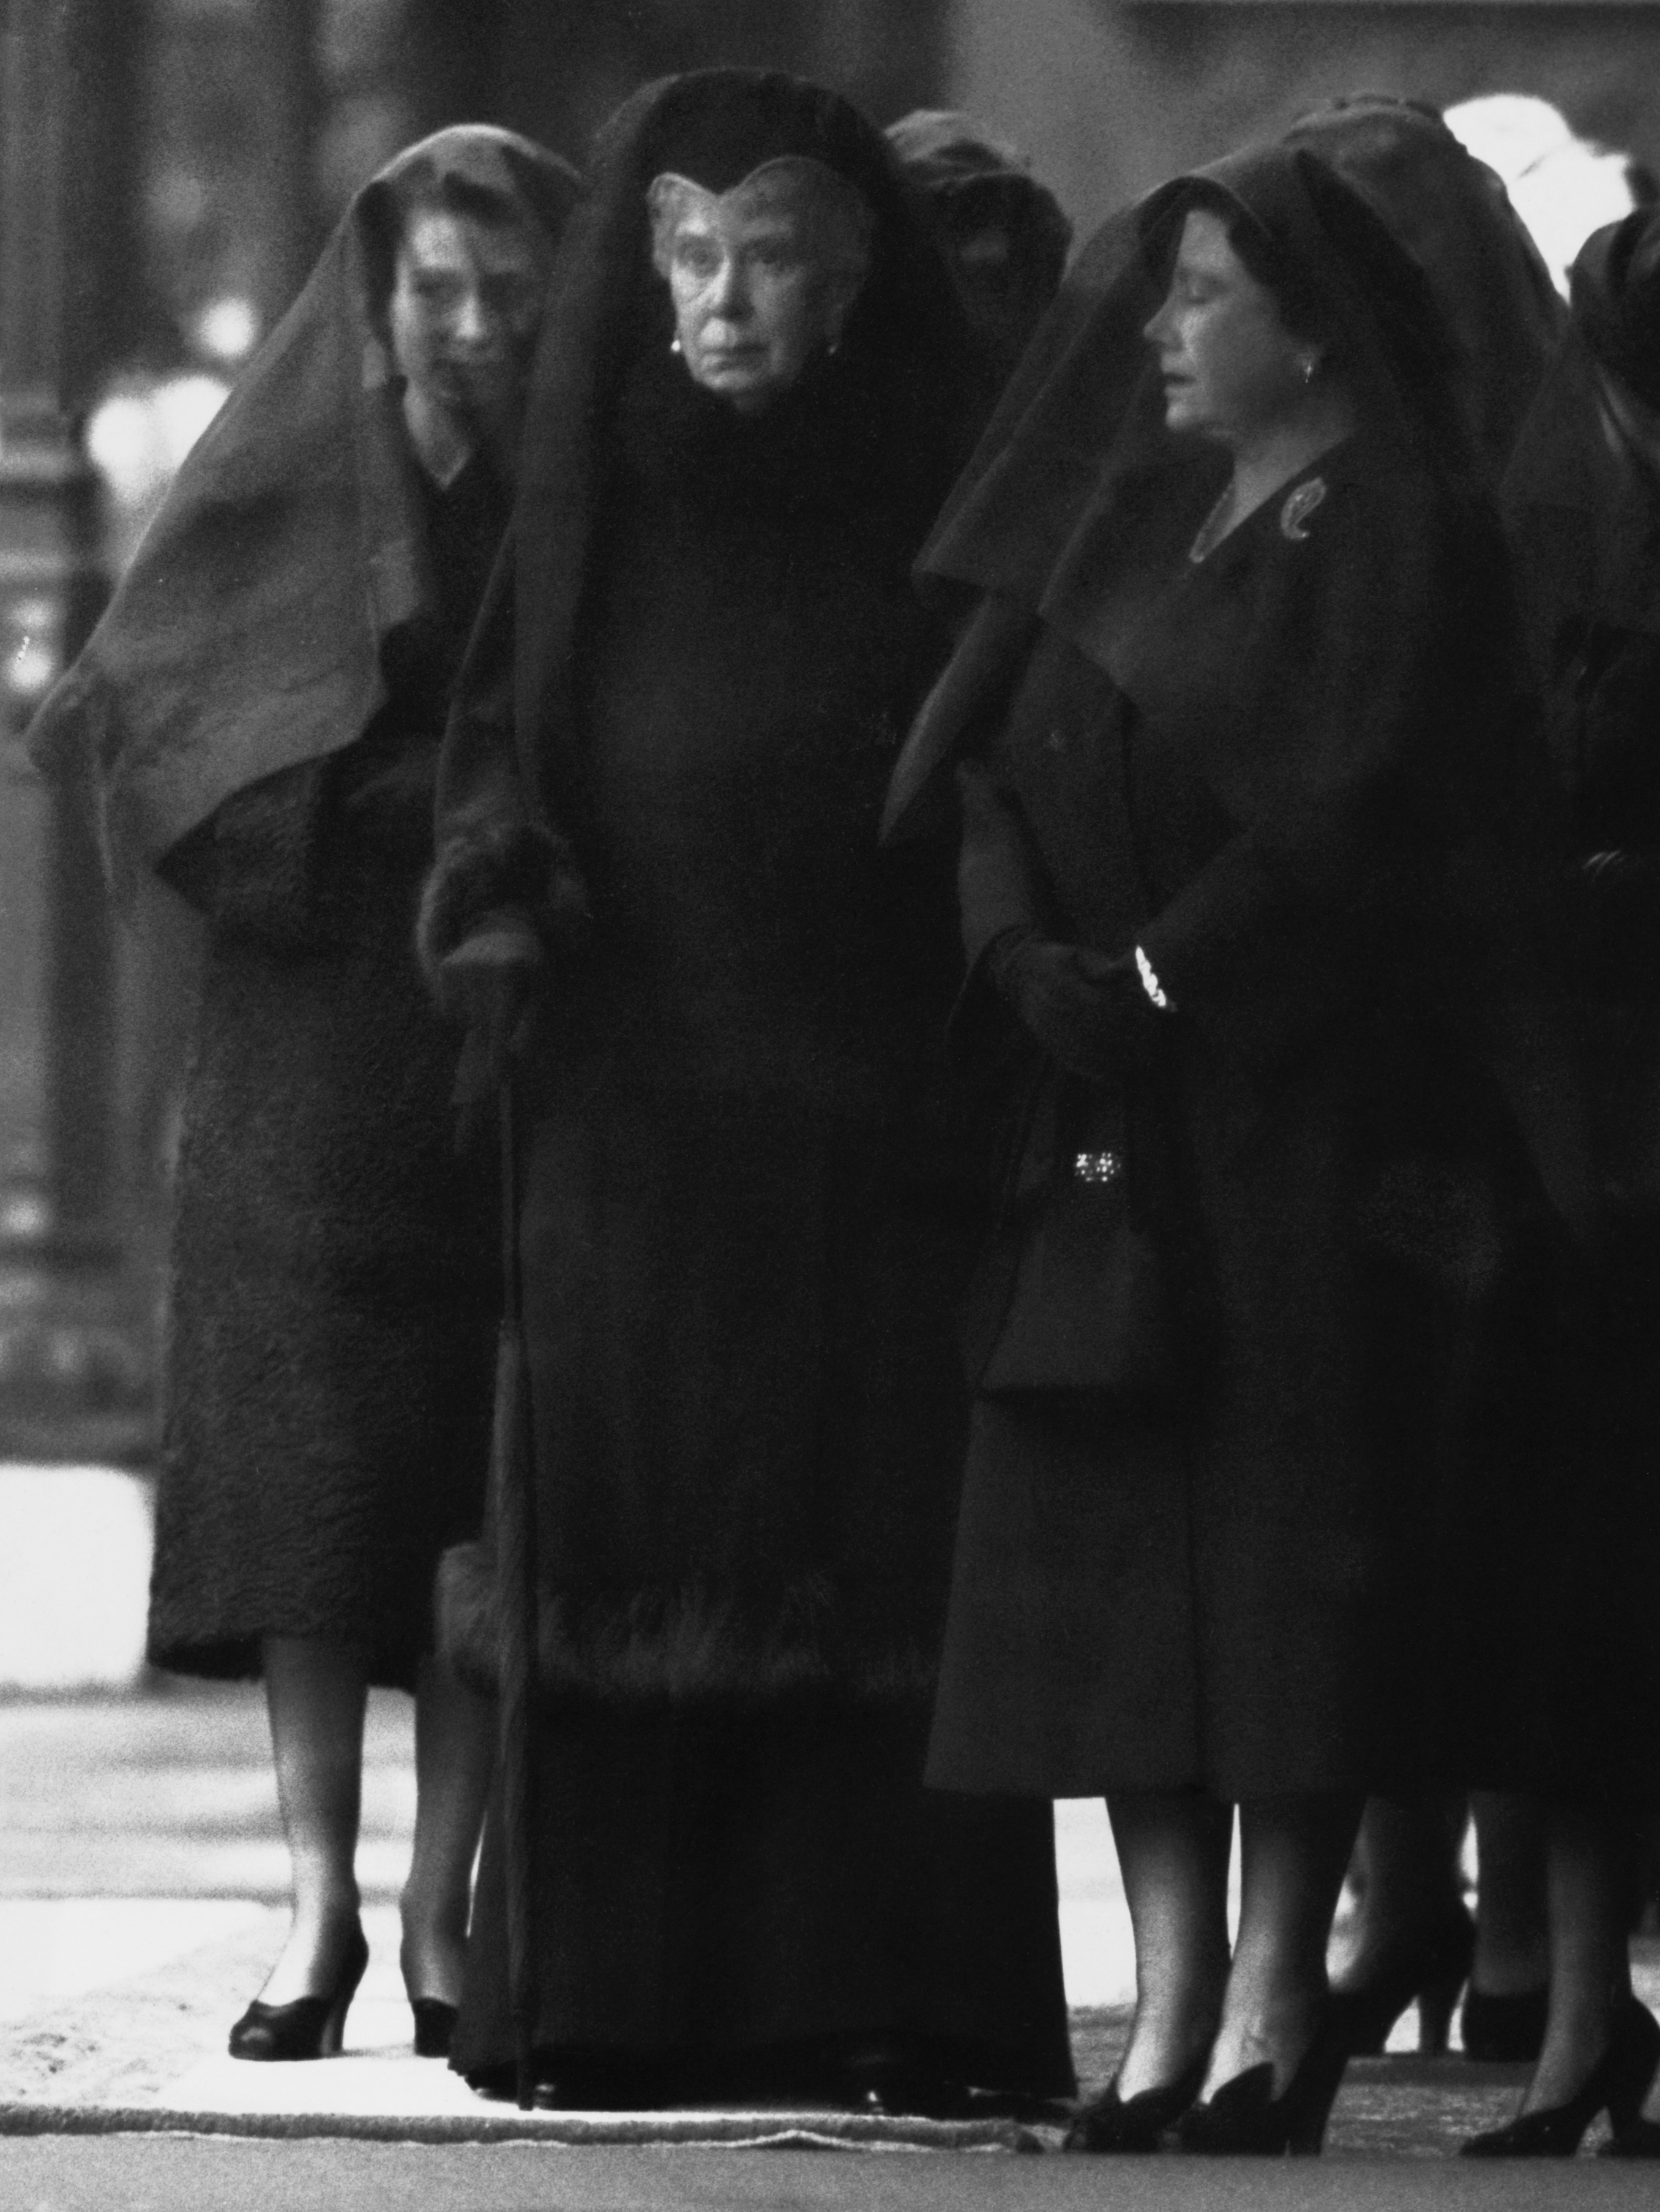 <p>The grief-stricken family of the late King George VI are seen at his funeral on Feb. 15, 1952: The new Queen Elizabeth II; her grandmother, Queen Mary -- the mother of the late king also known as Mary of Teck; and the king's widow, Queen Elizabeth the Queen Mother.</p>